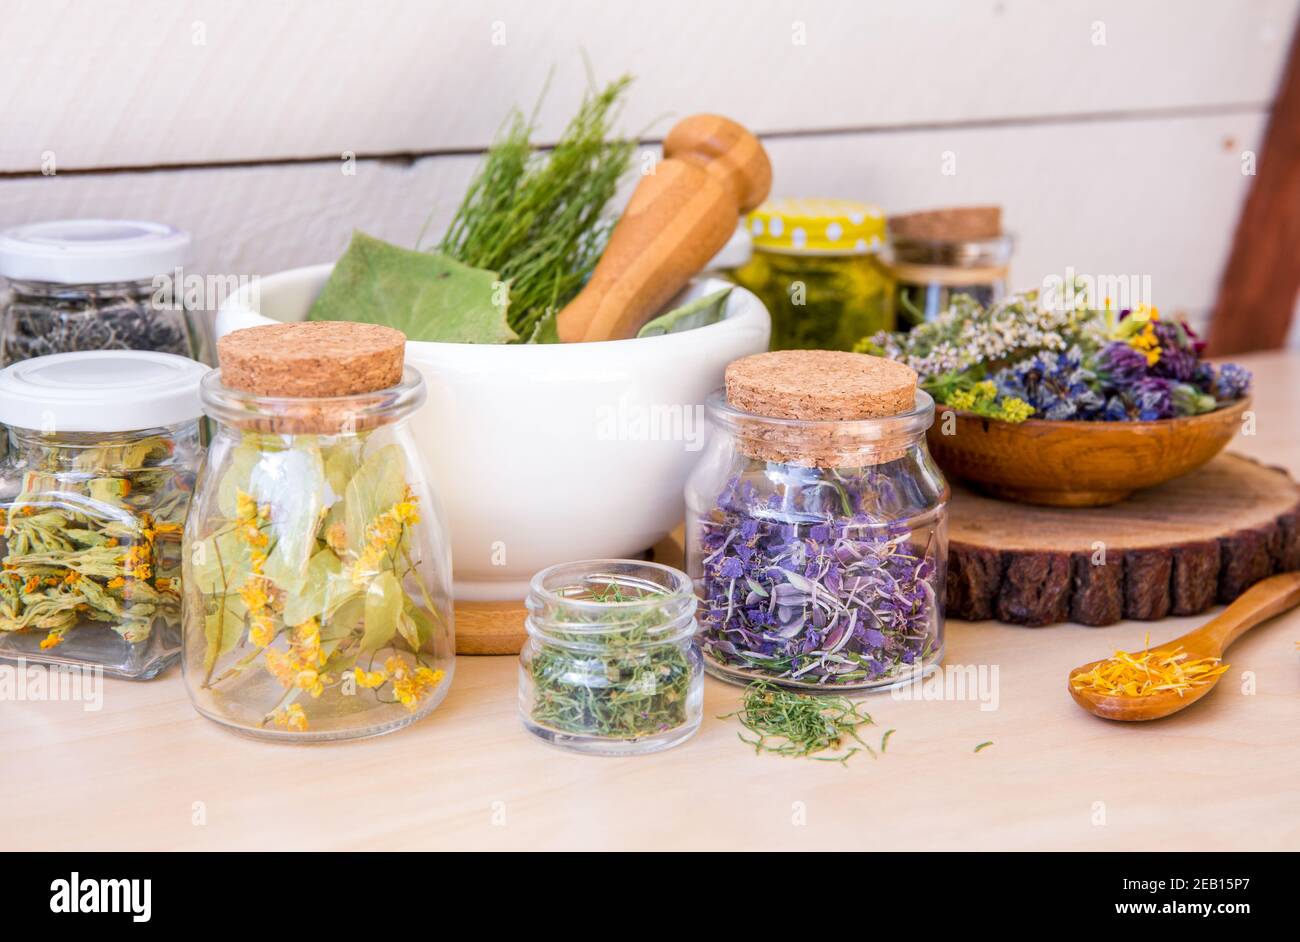 Home herbal apothecary concept. Lot of different dry herbal remedy plants( Chamaenerion angustifolium, Achillea millefolium, Tilia platyphyllos. Stock Photo